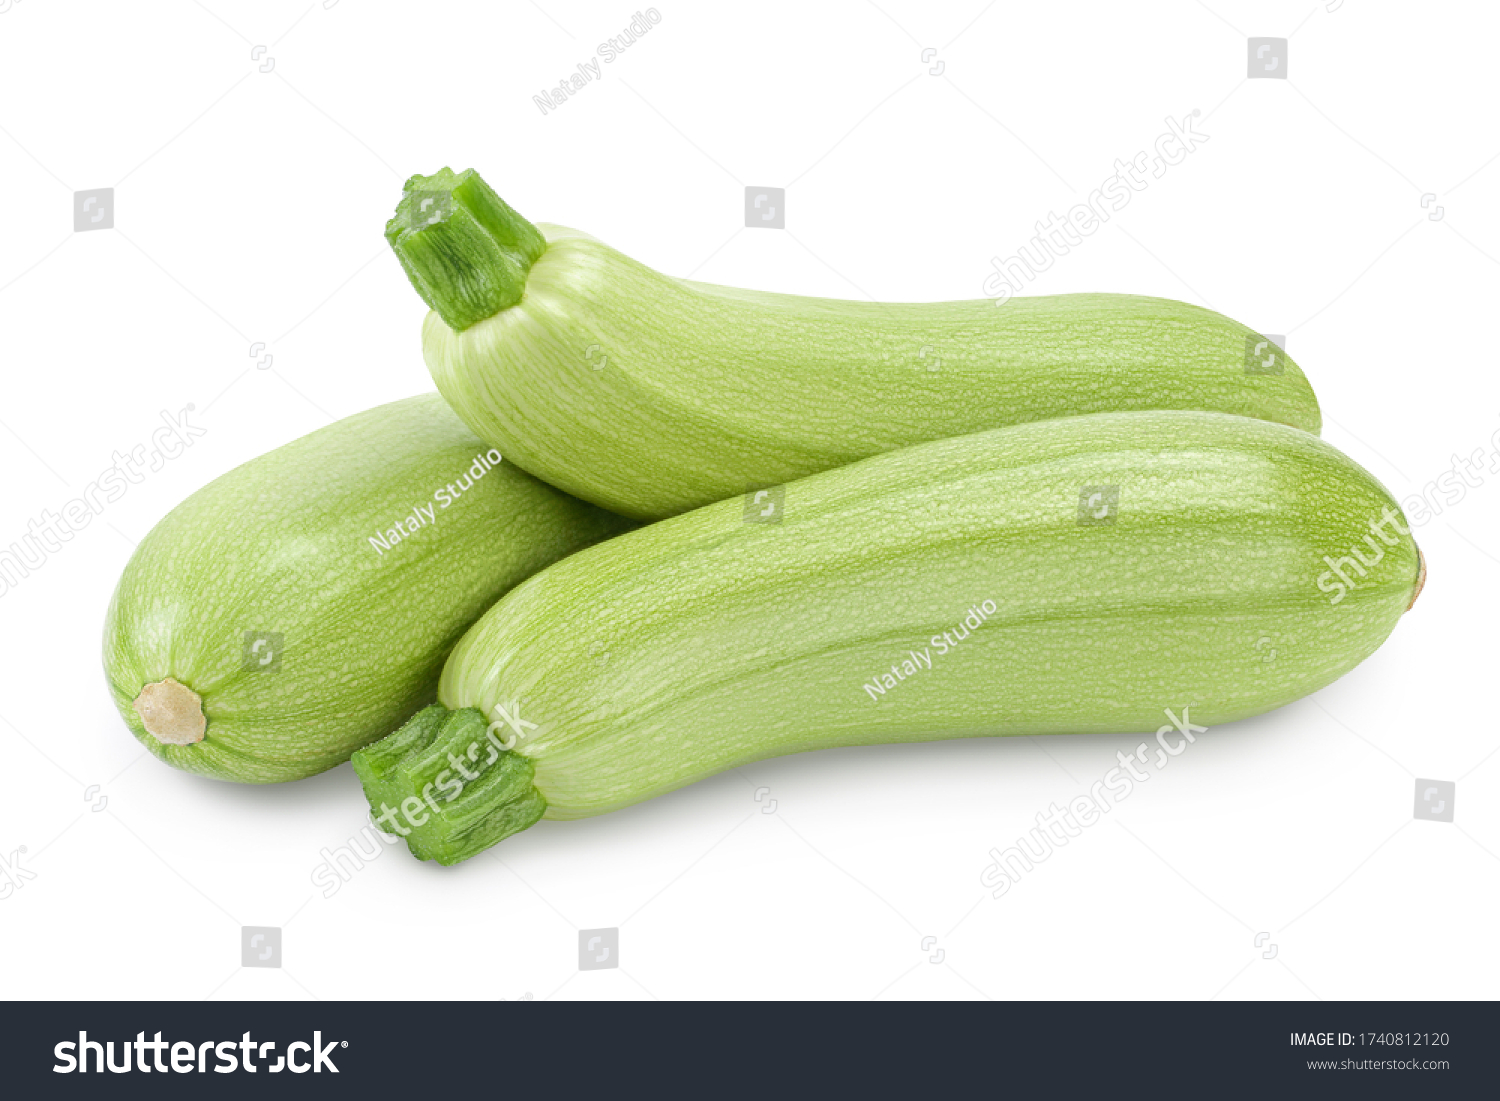 zucchini or marrow isolated on white background with clipping path and full depth of field #1740812120